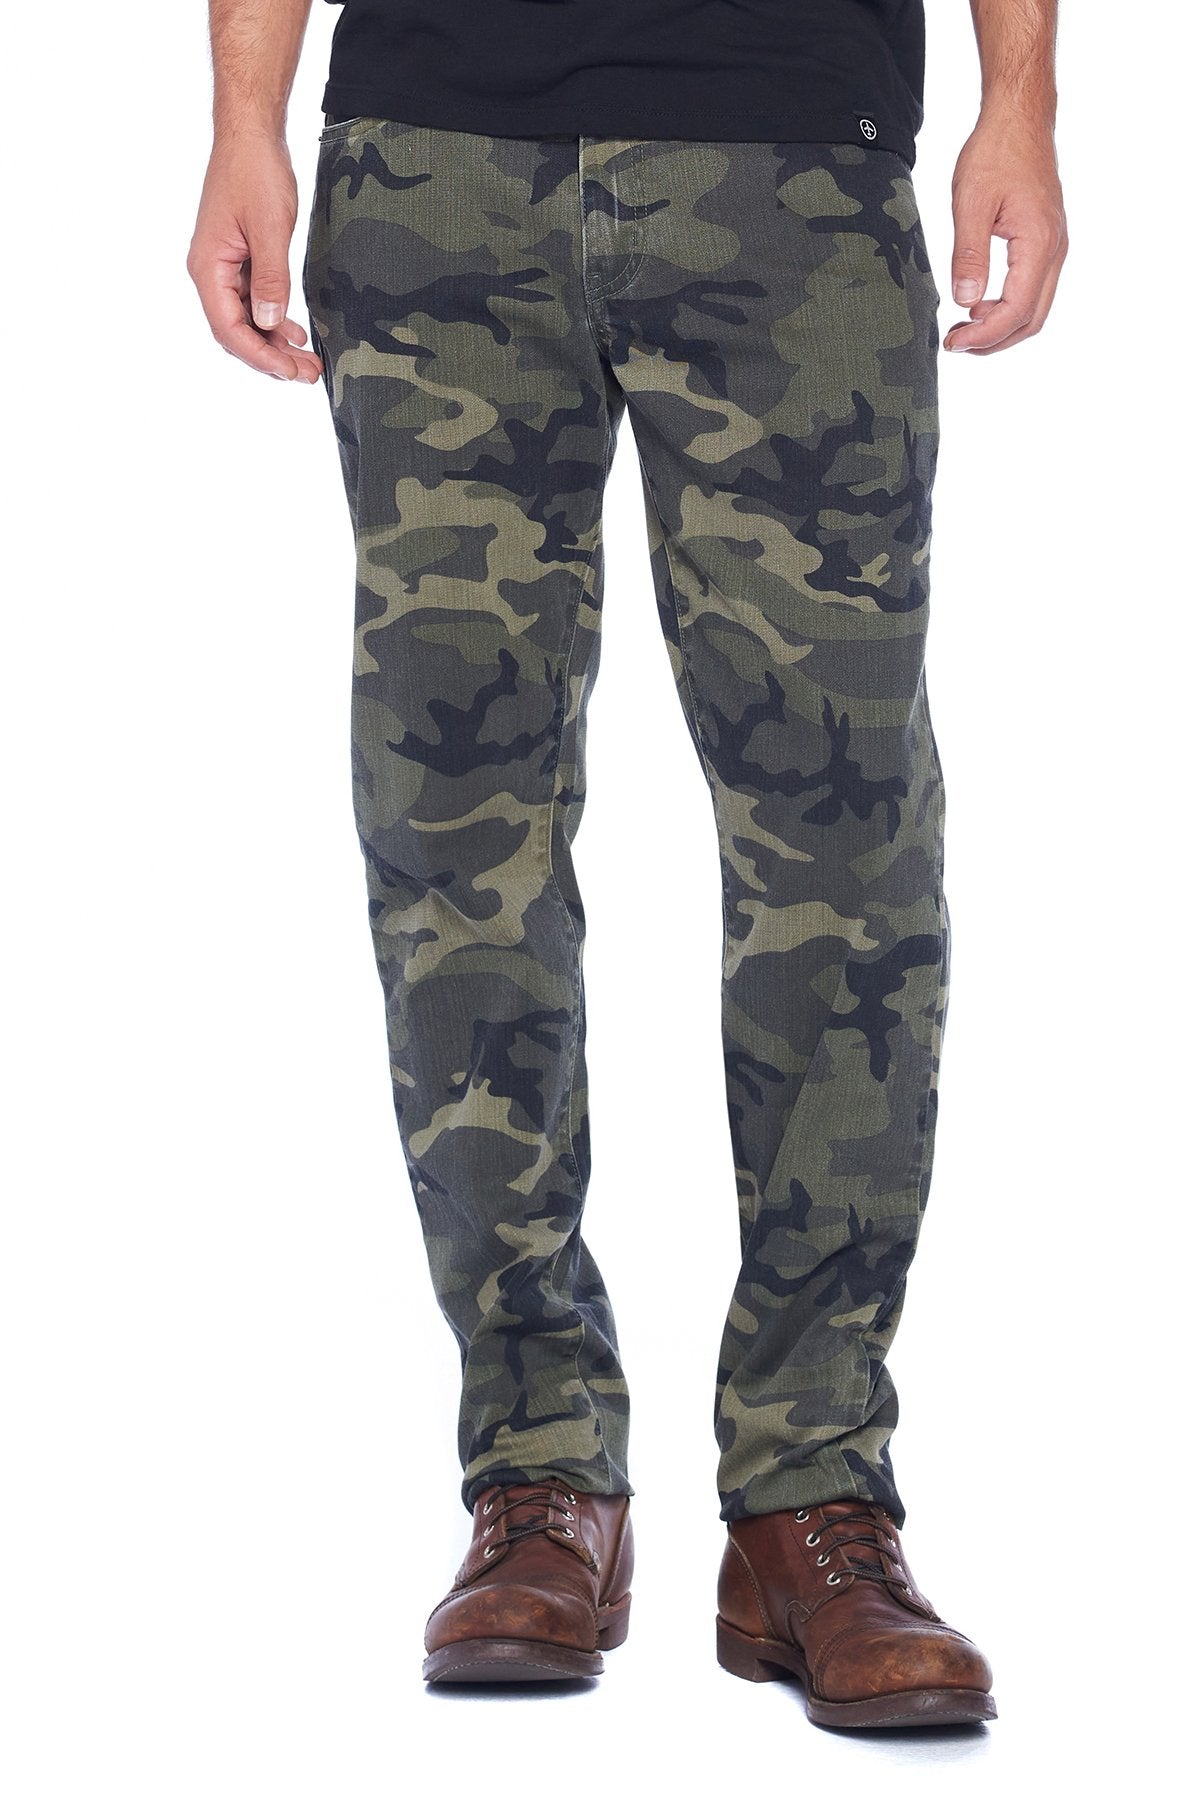 The Best Travel Jeans in the World for Men | Camo | Made in the USA ...